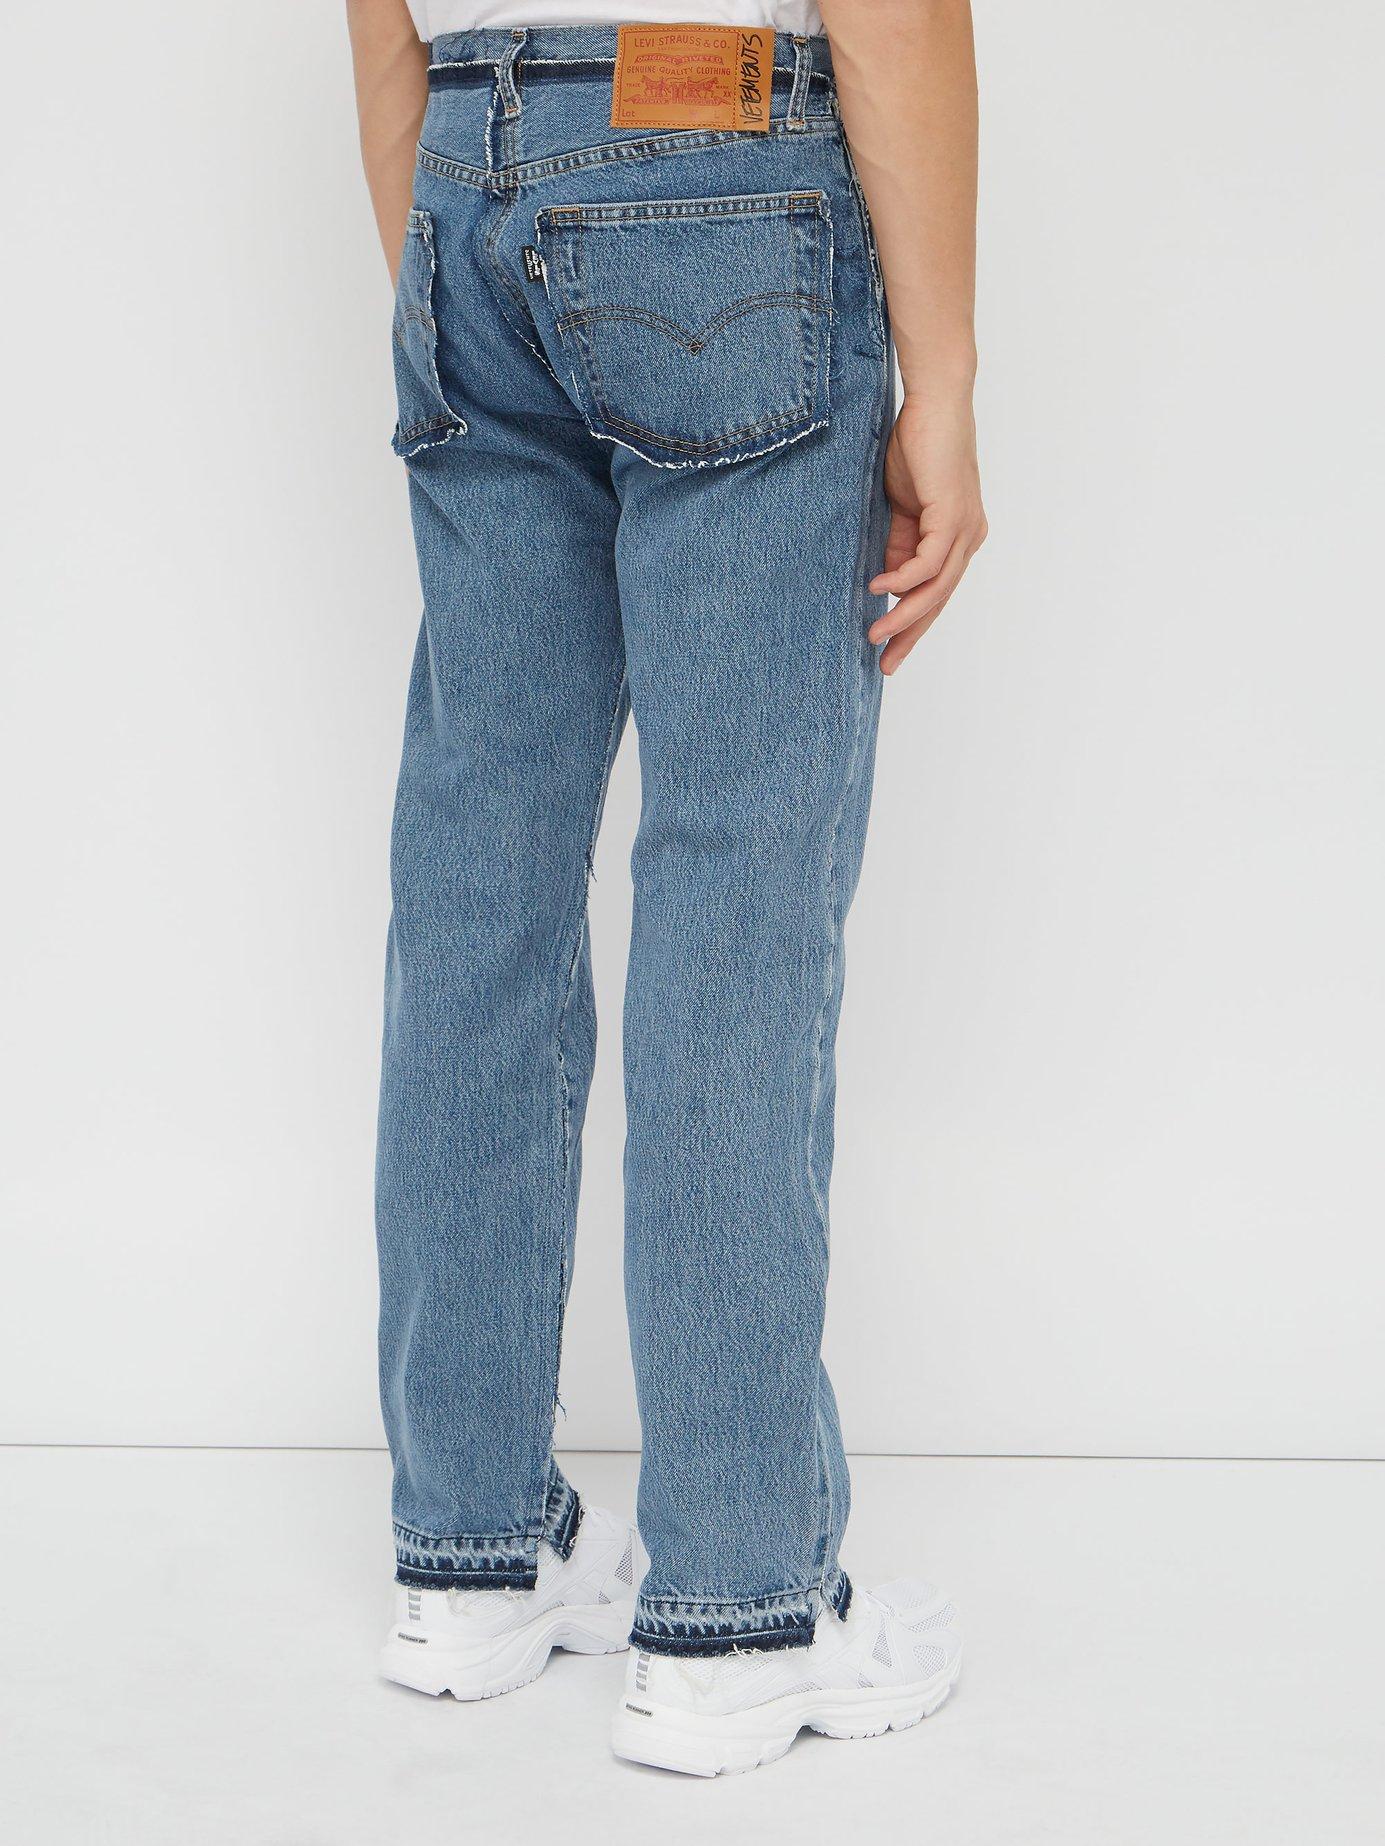 Vetements X Levi's Deconstructed Reworked Blue Jeans for Men | Lyst Canada